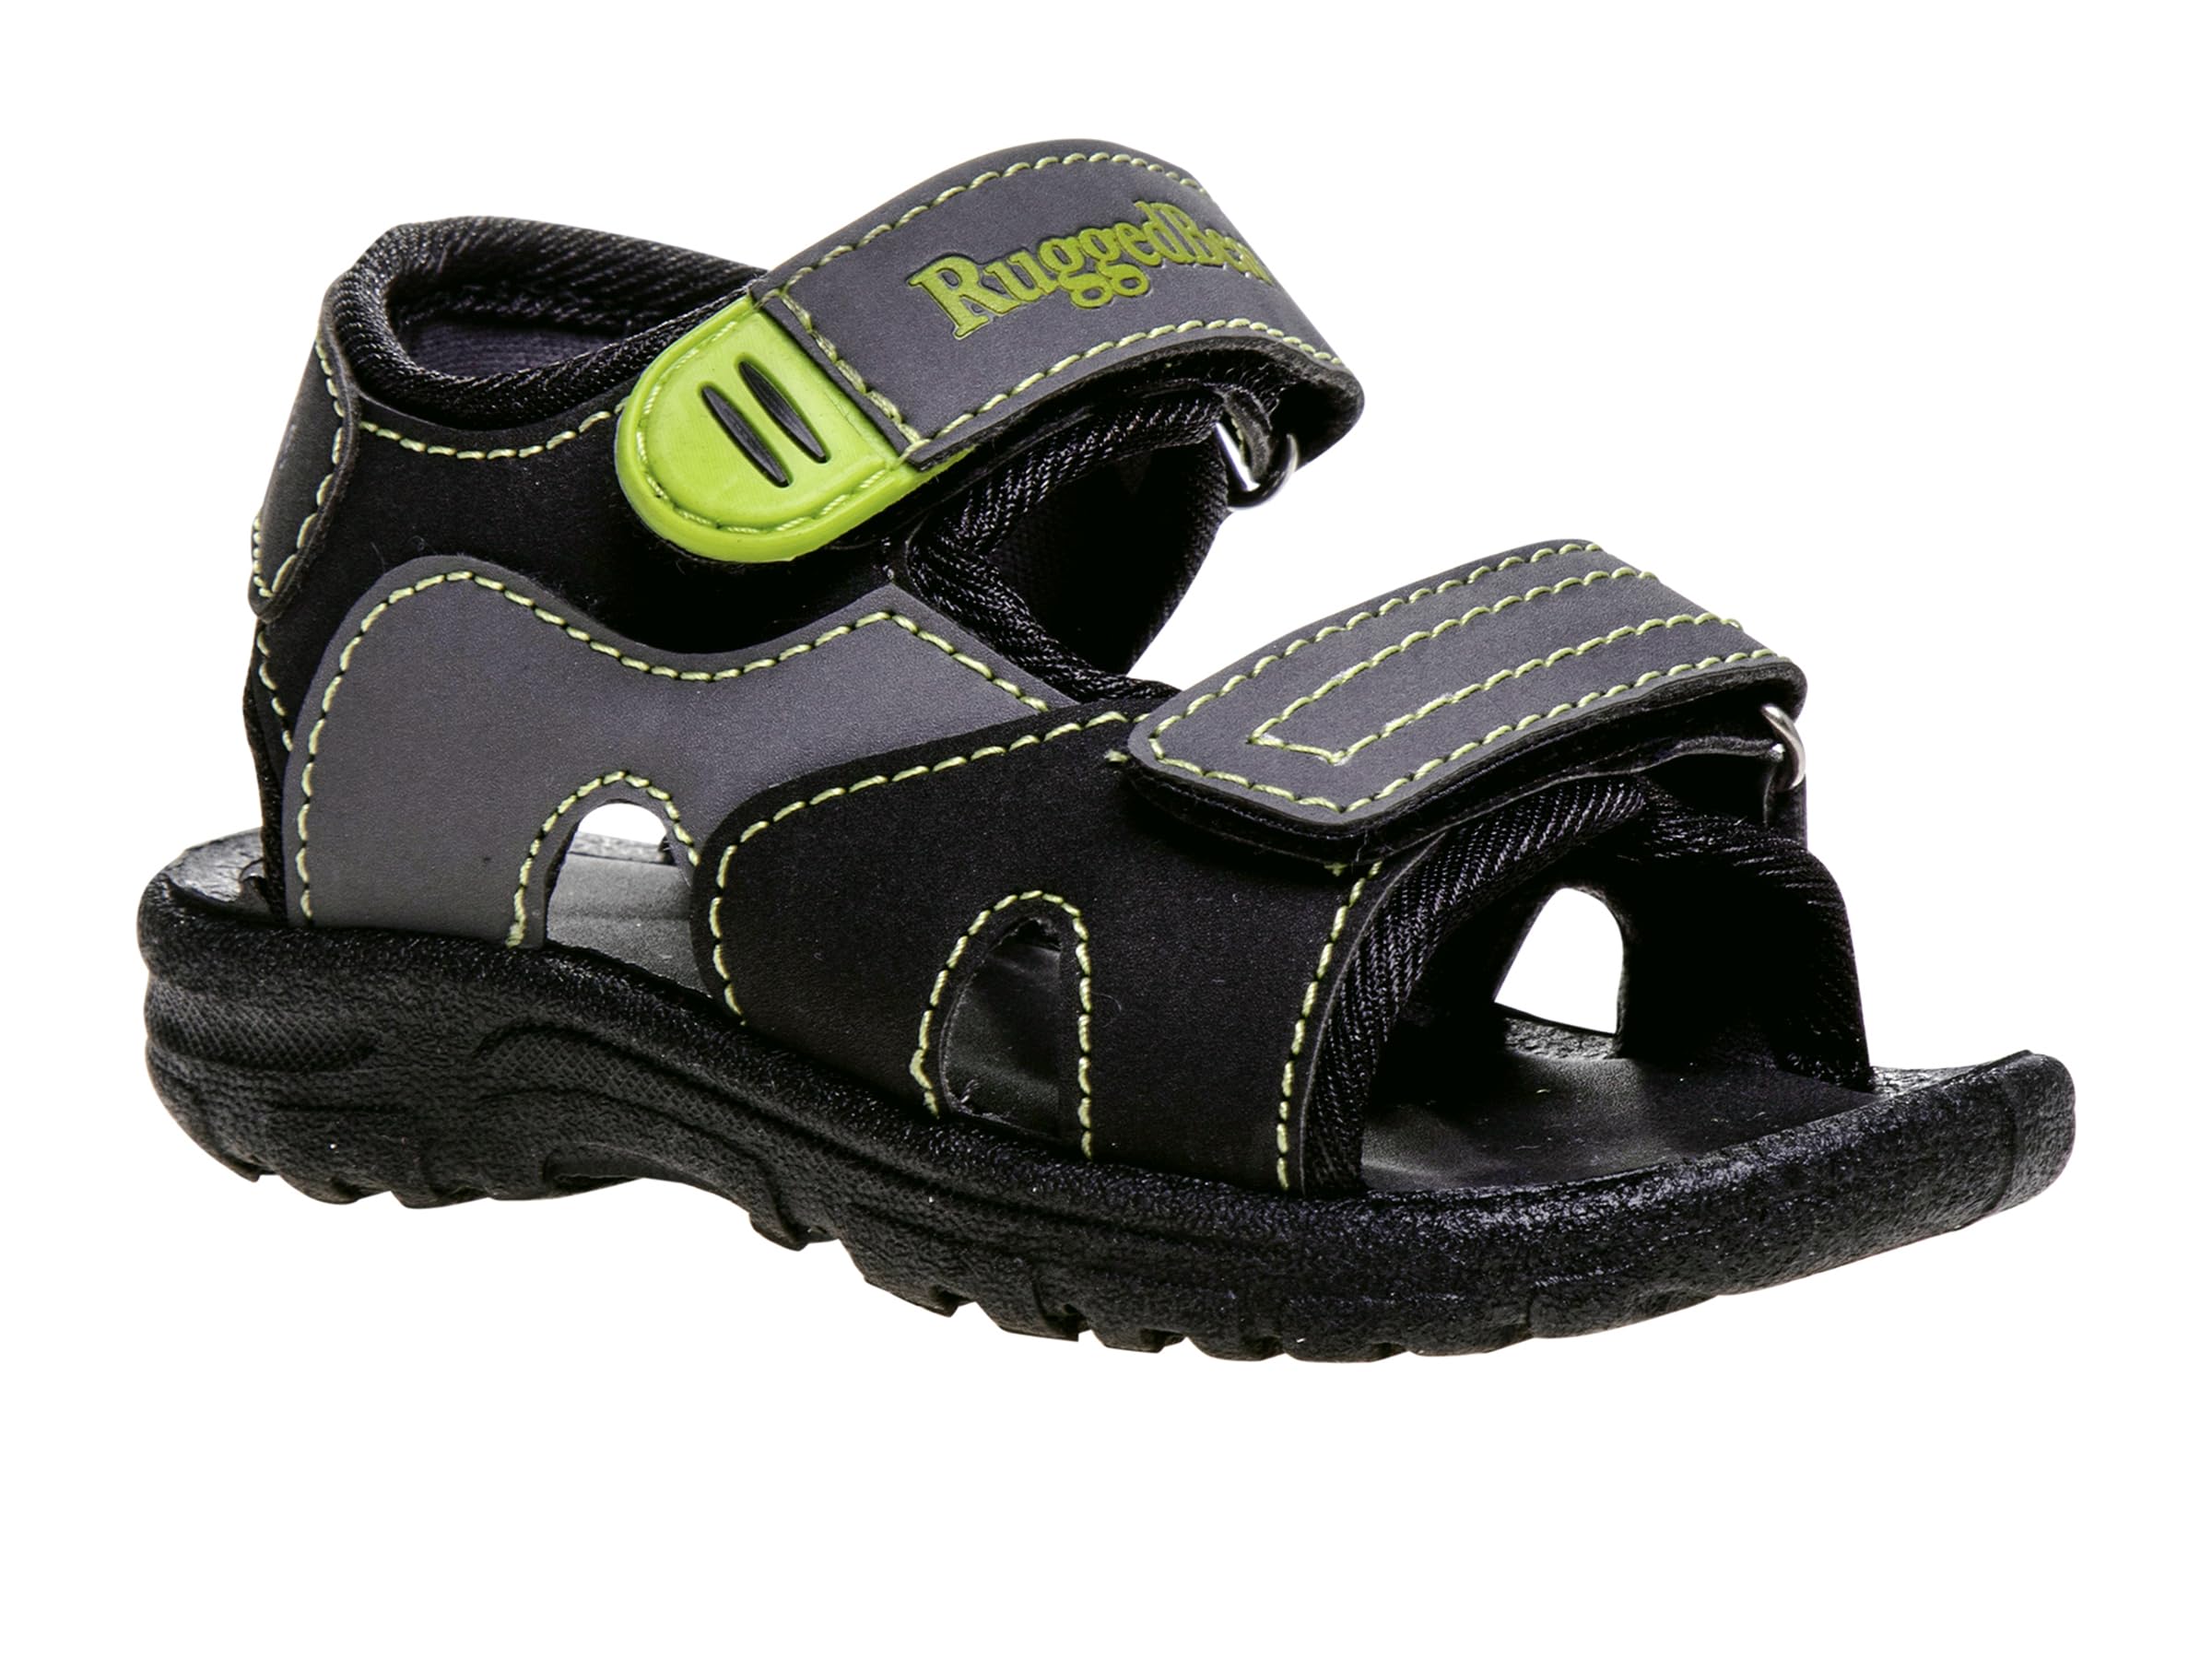 Rugged Bear Unisex-Child Outdoor Sport Water Open-Toe Sandals Athletic Summer Beach Pool Shoes (Toddler-Big Kid)